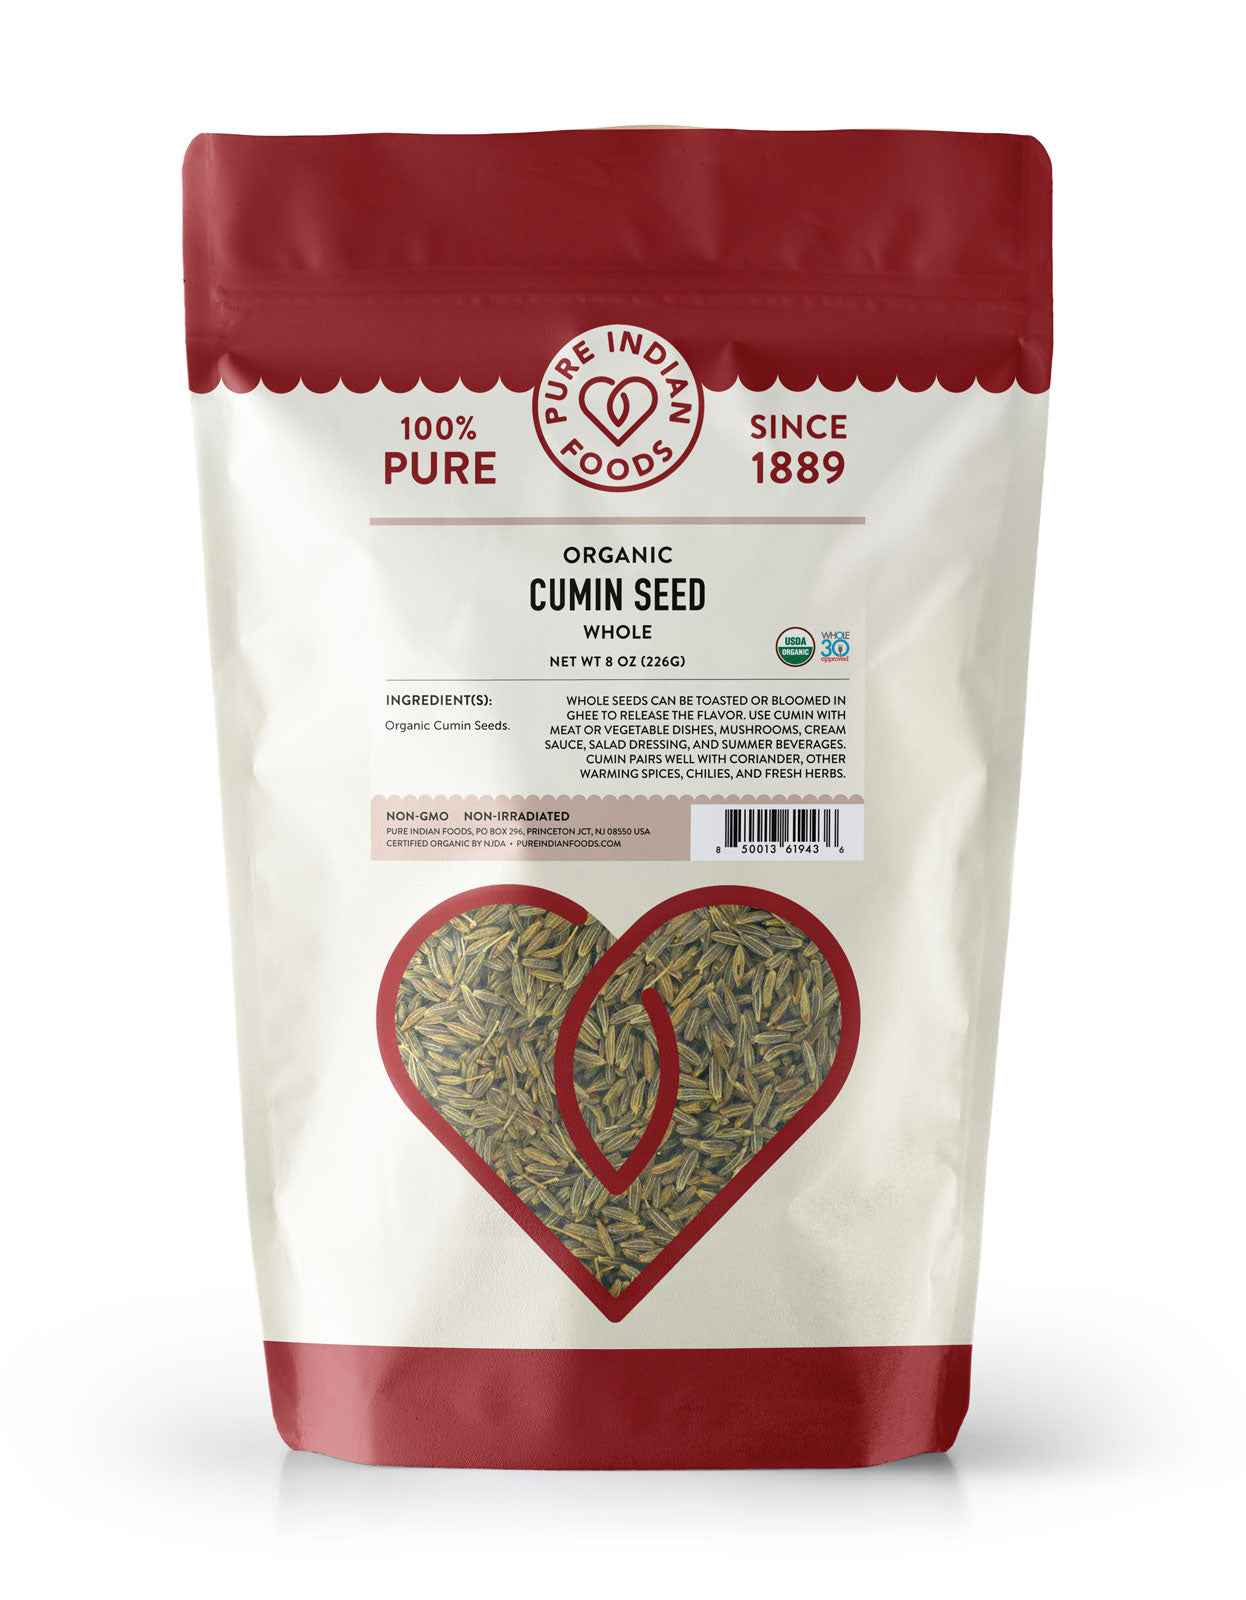 Large package of organic, whole jeera seeds from Pure Indian Foods, also known as white cumin seeds.